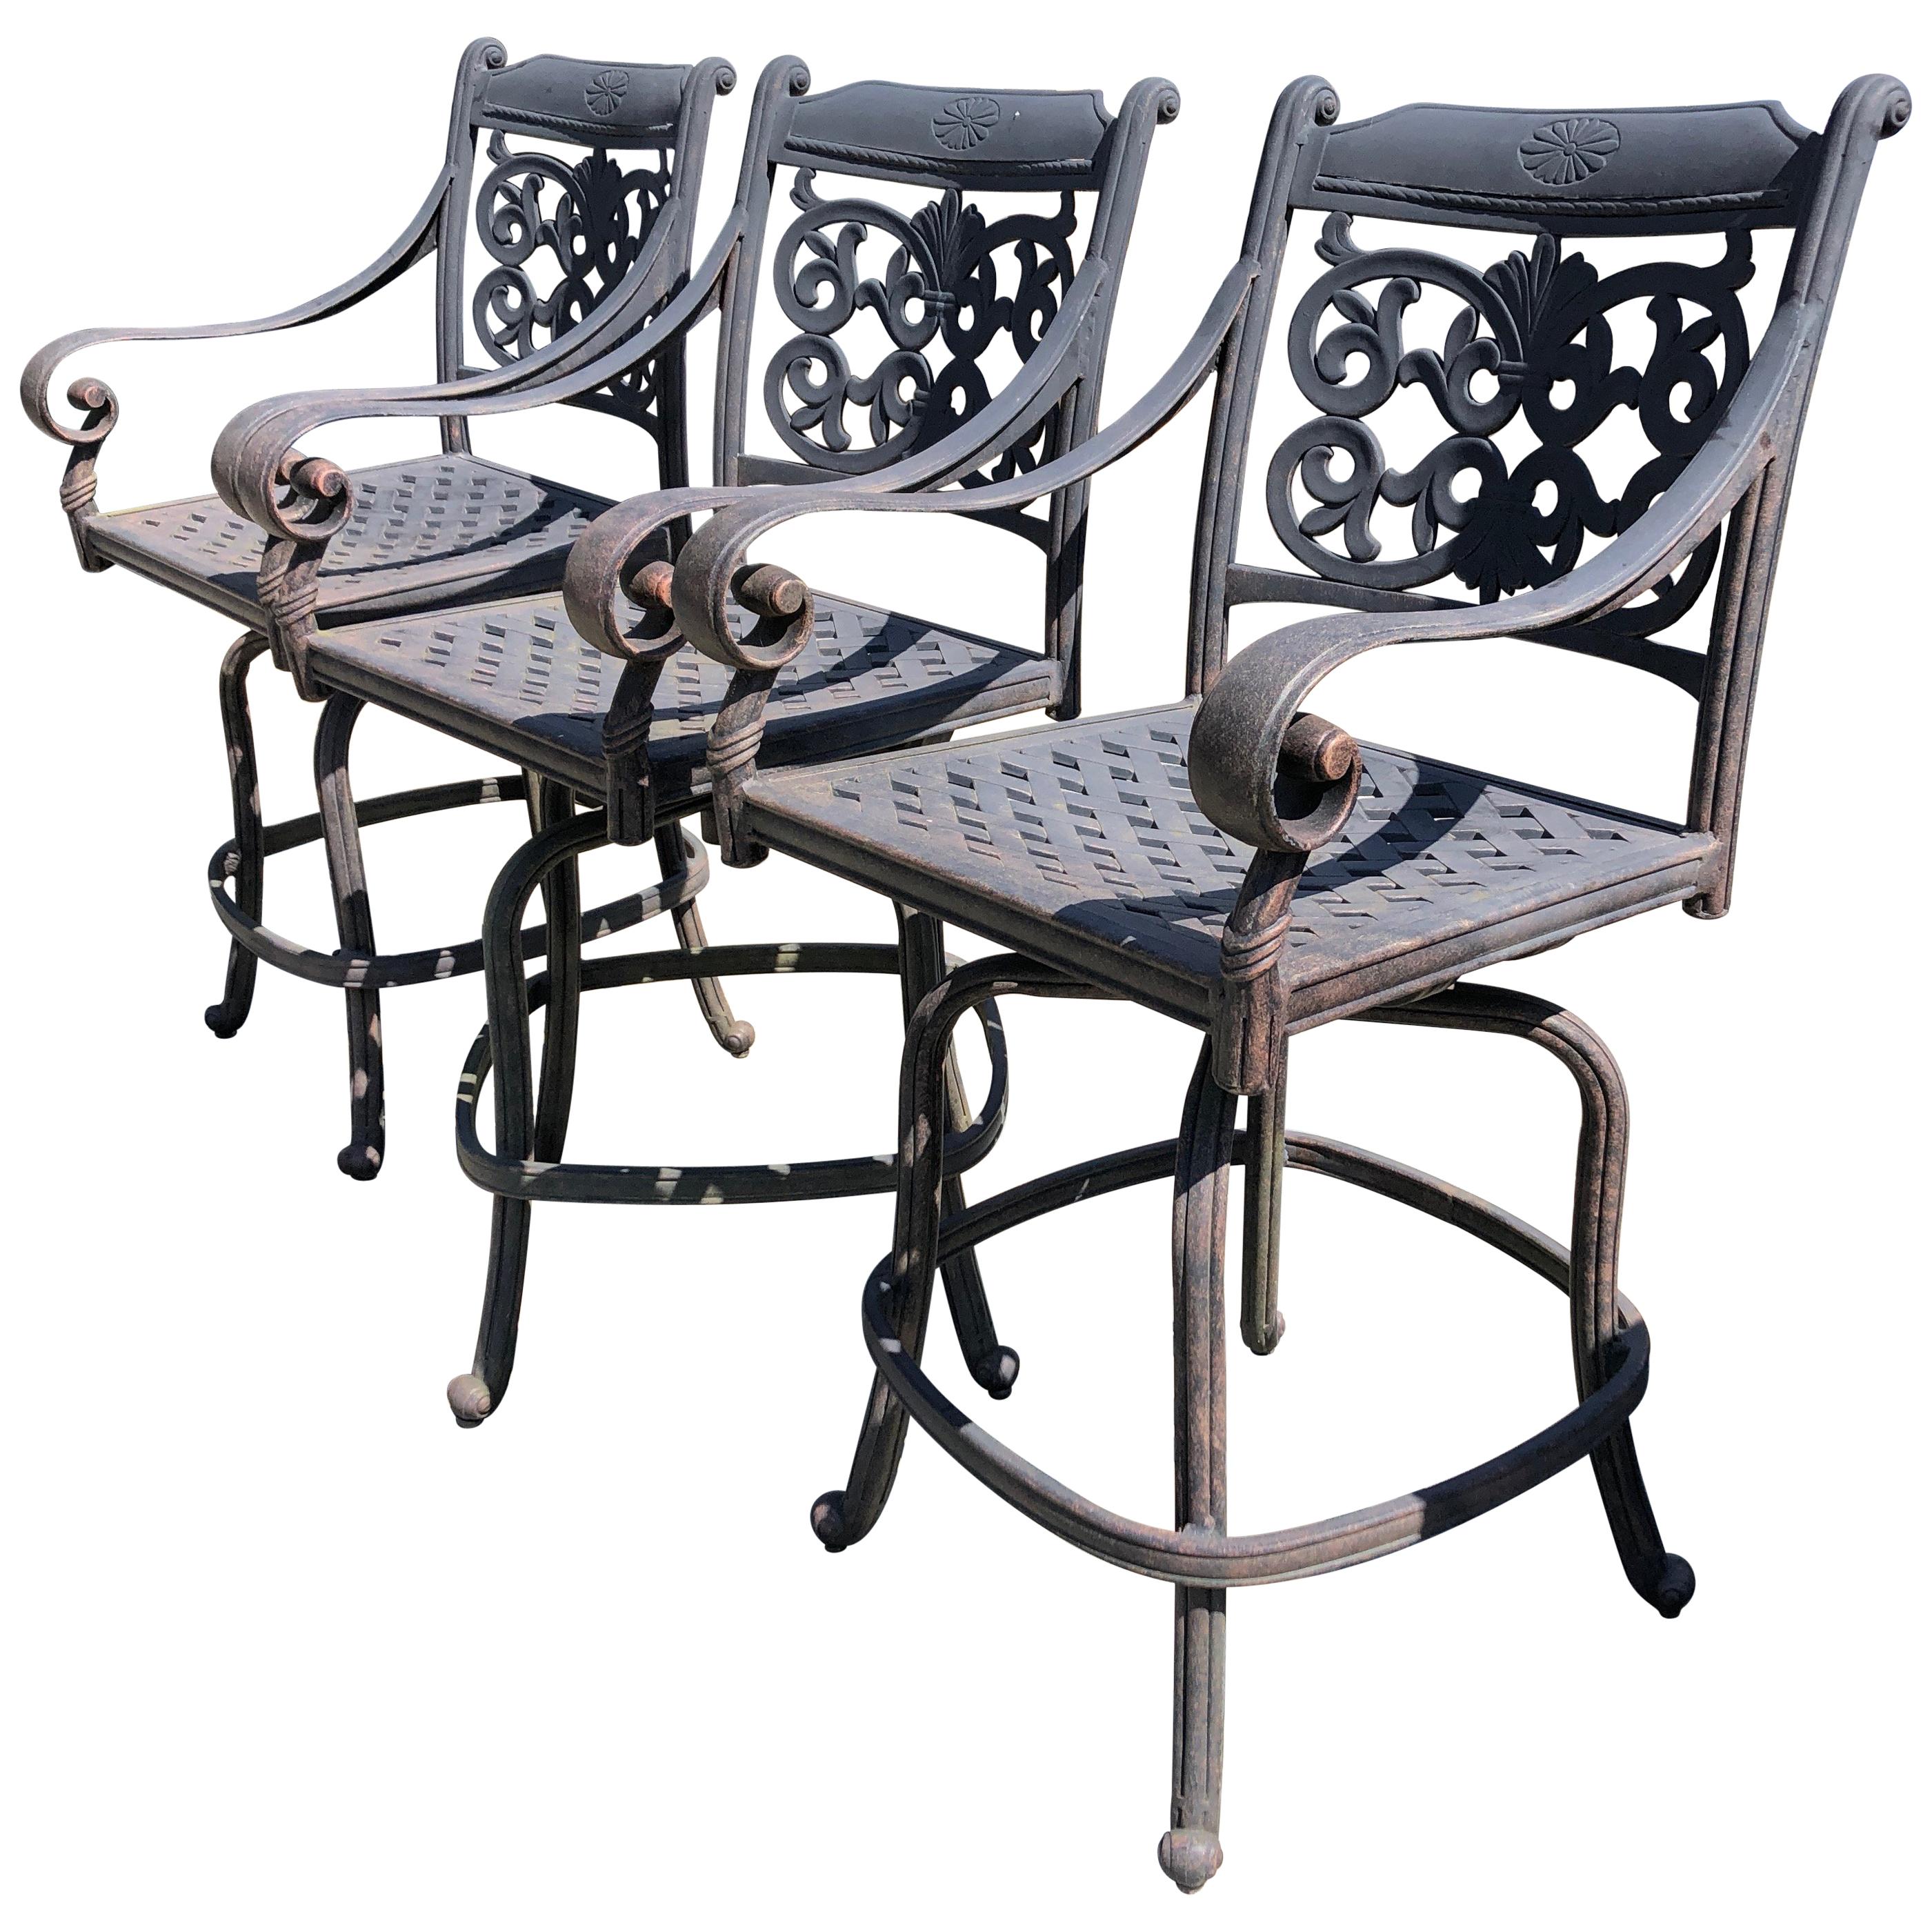 Trio of Handsome Large Outdoor Swivel Cast Aluminum Bar Stools for the Patio